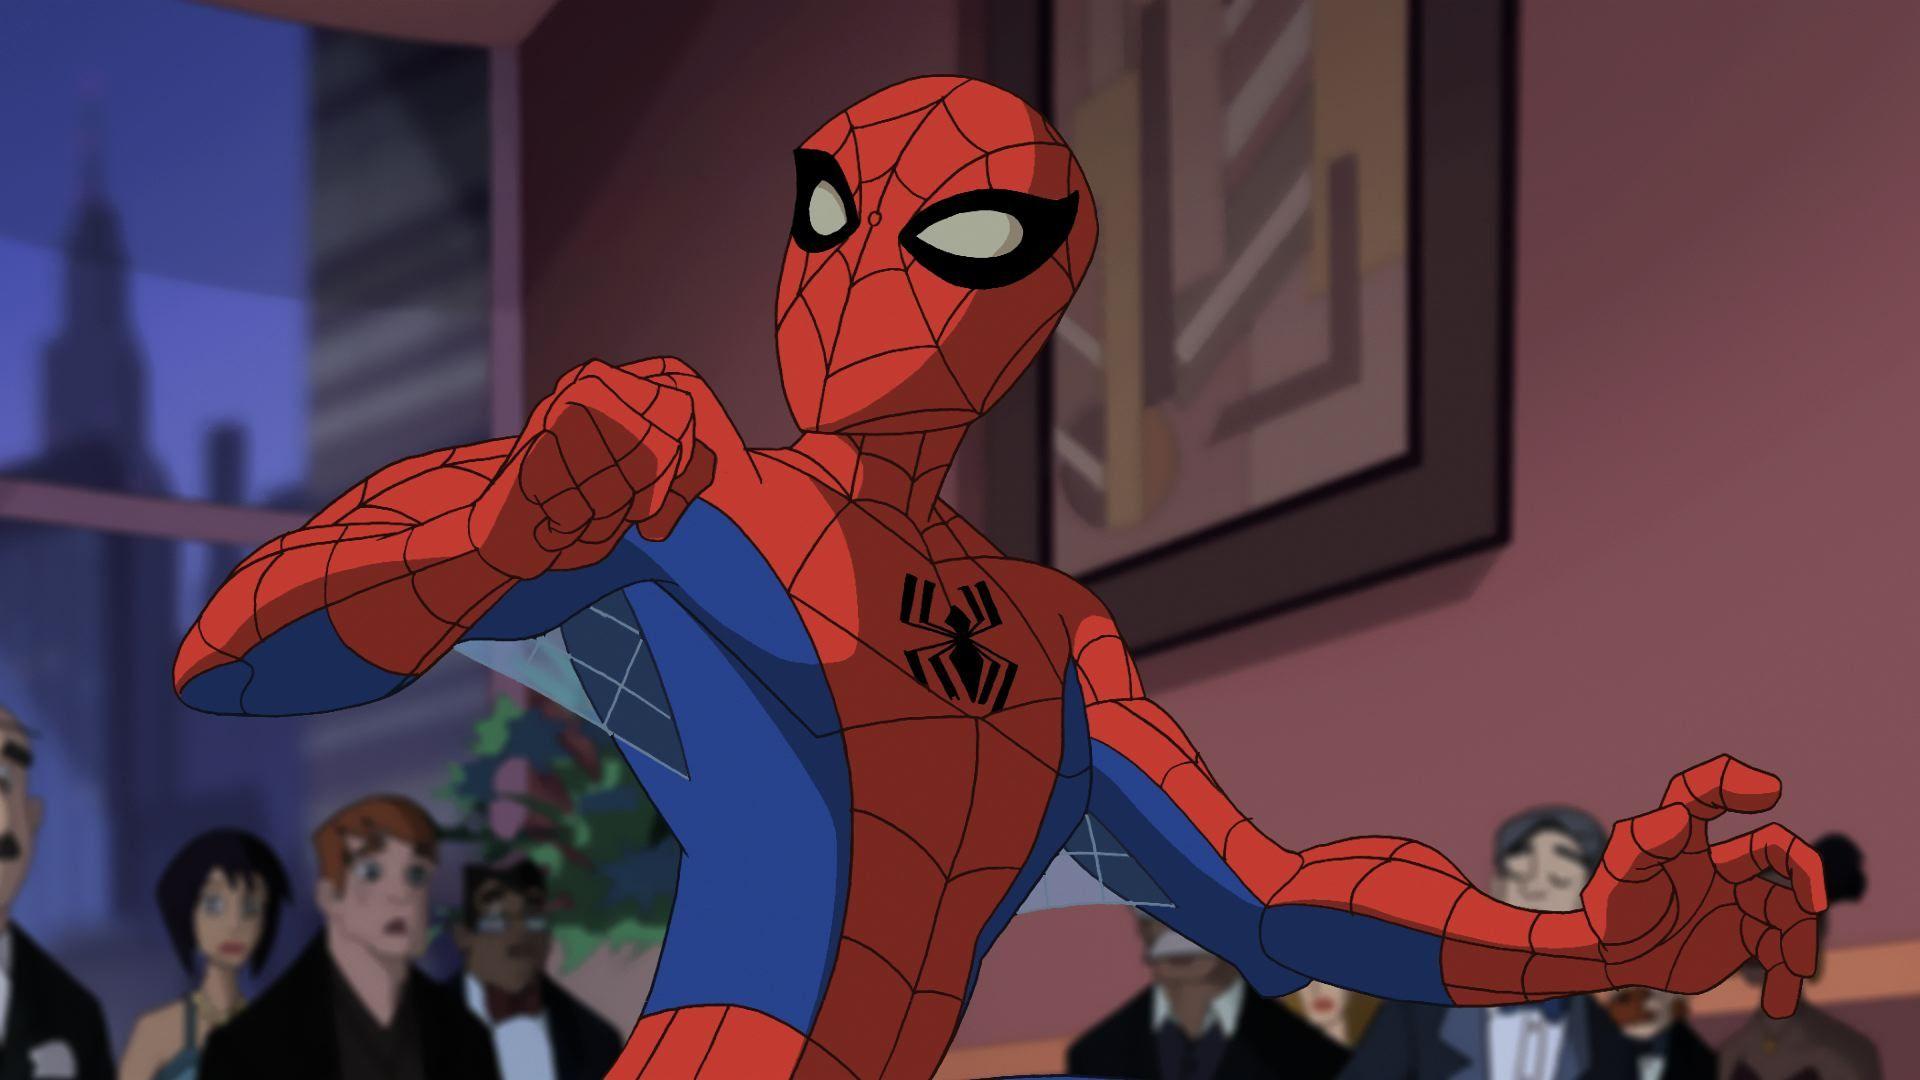 Scratch That Other Spider Man News, Phil Lord And Chris Miller Are